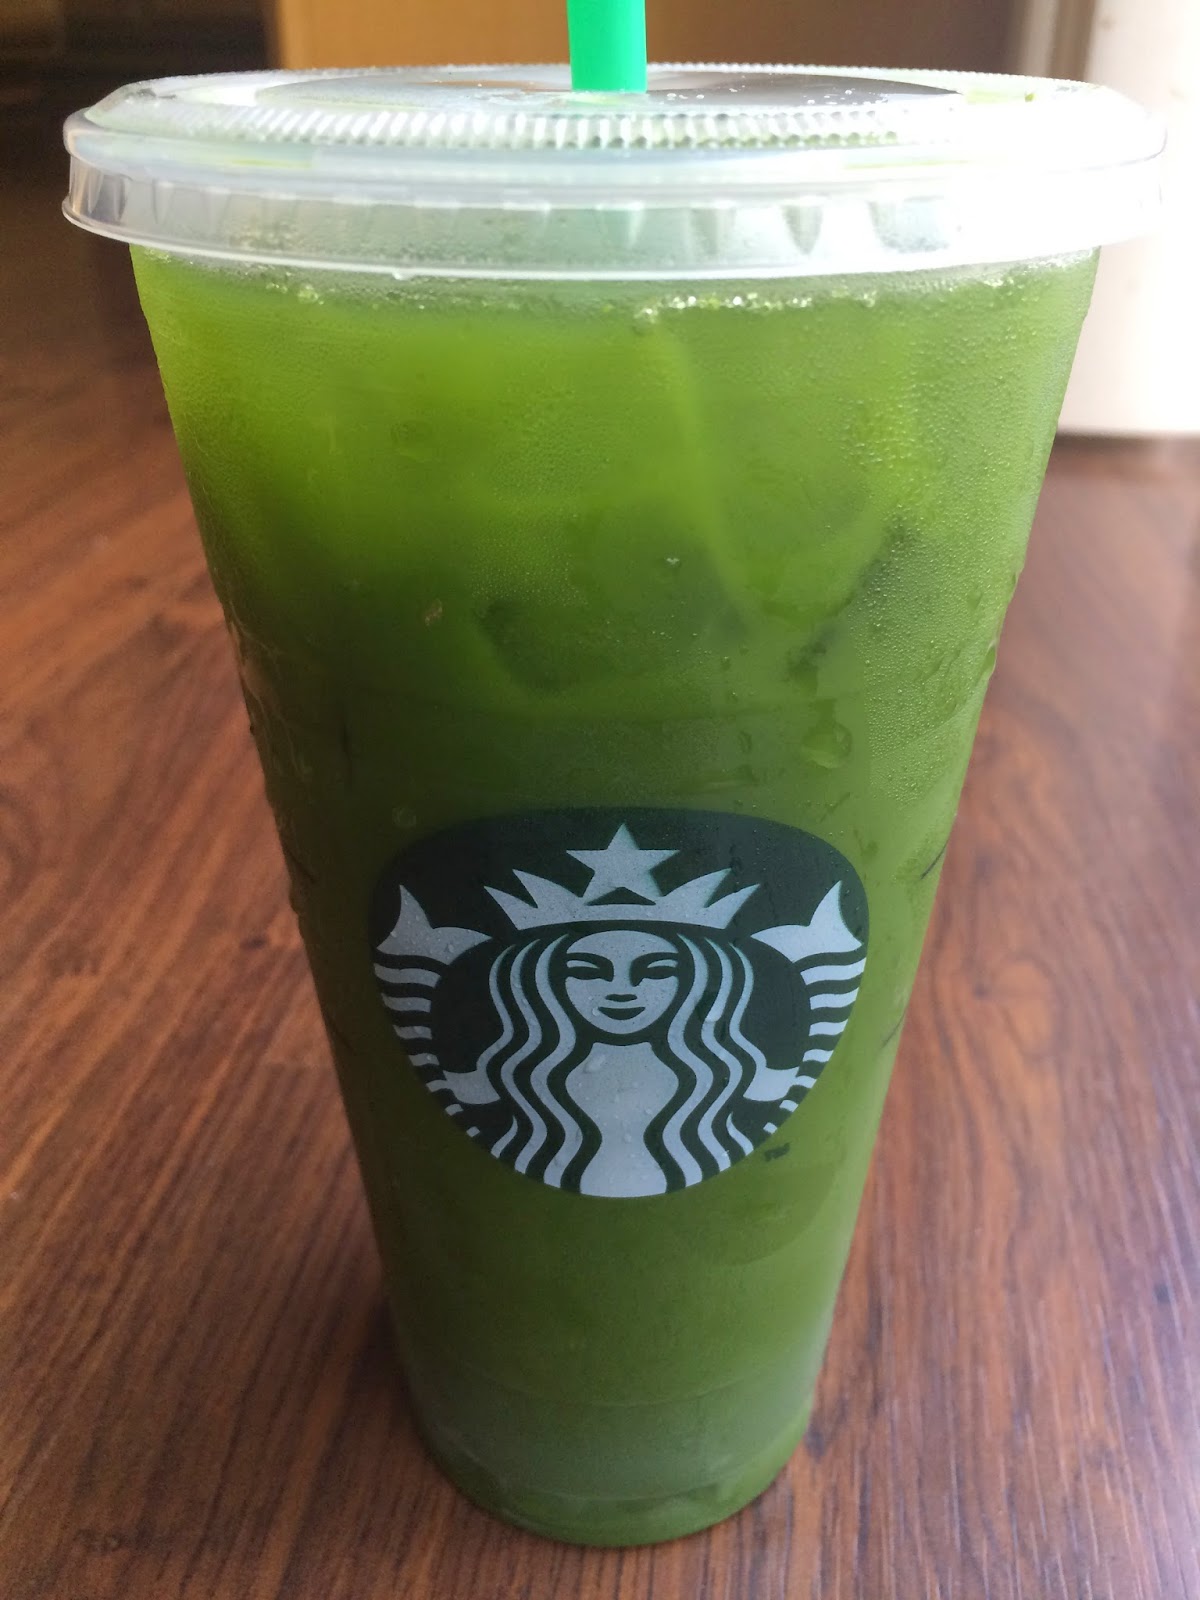 what is in the matcha green tea latte at starbucks